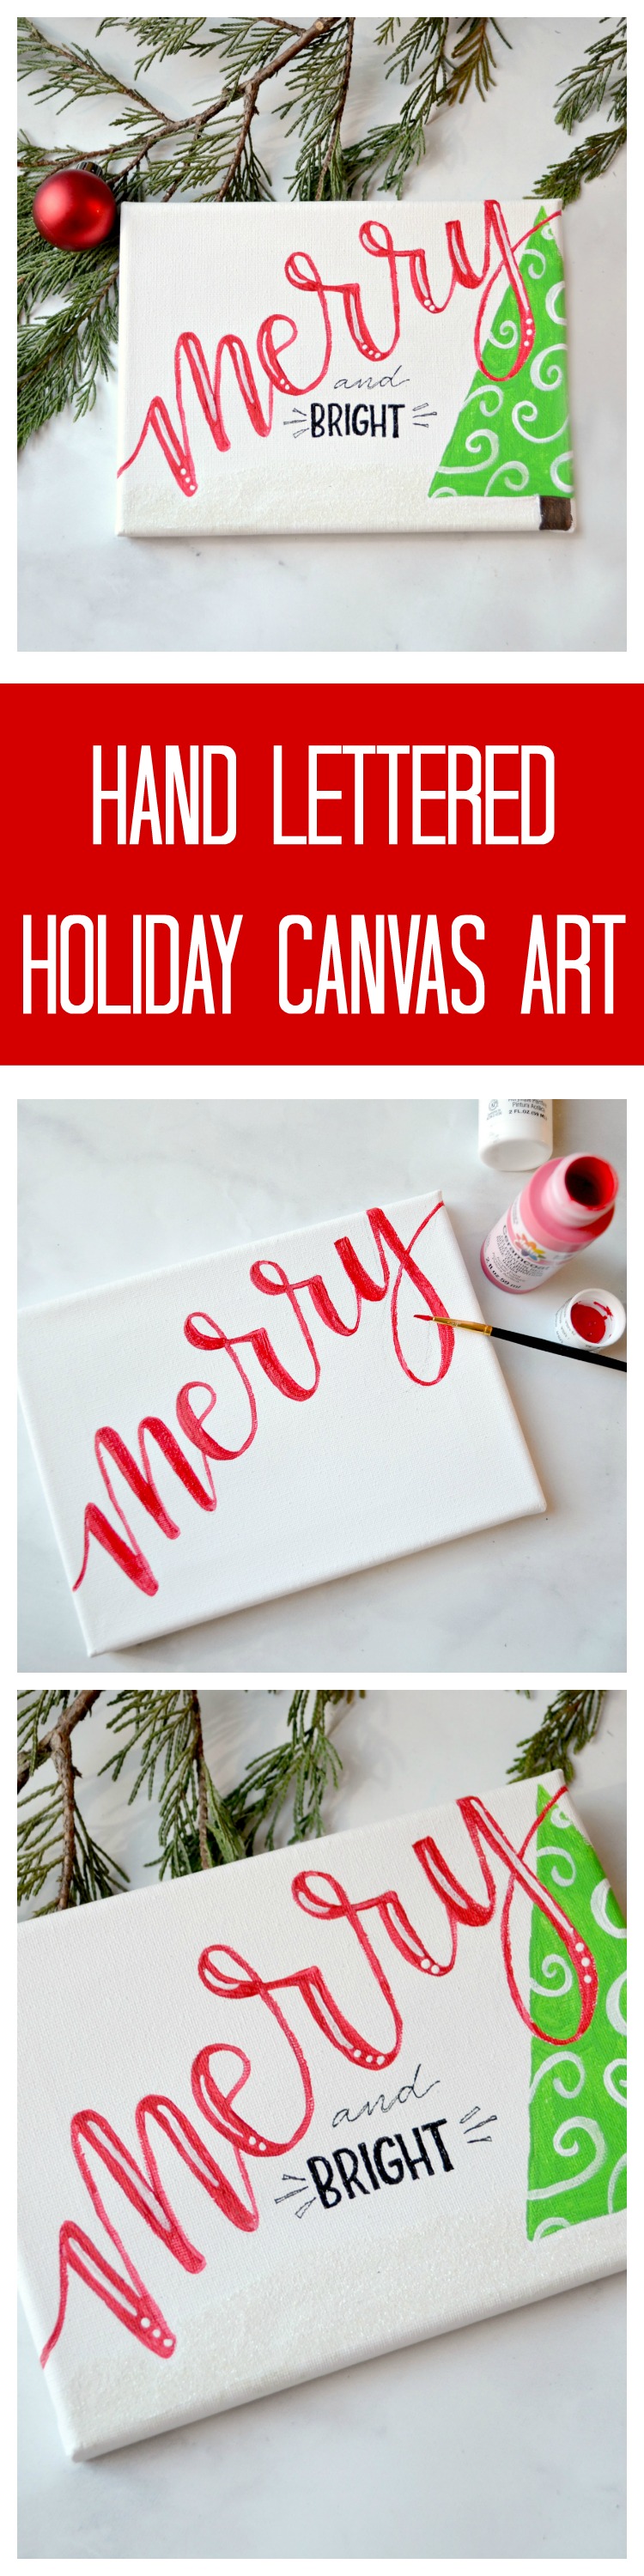 Hand Lettered Holiday Canvas Art